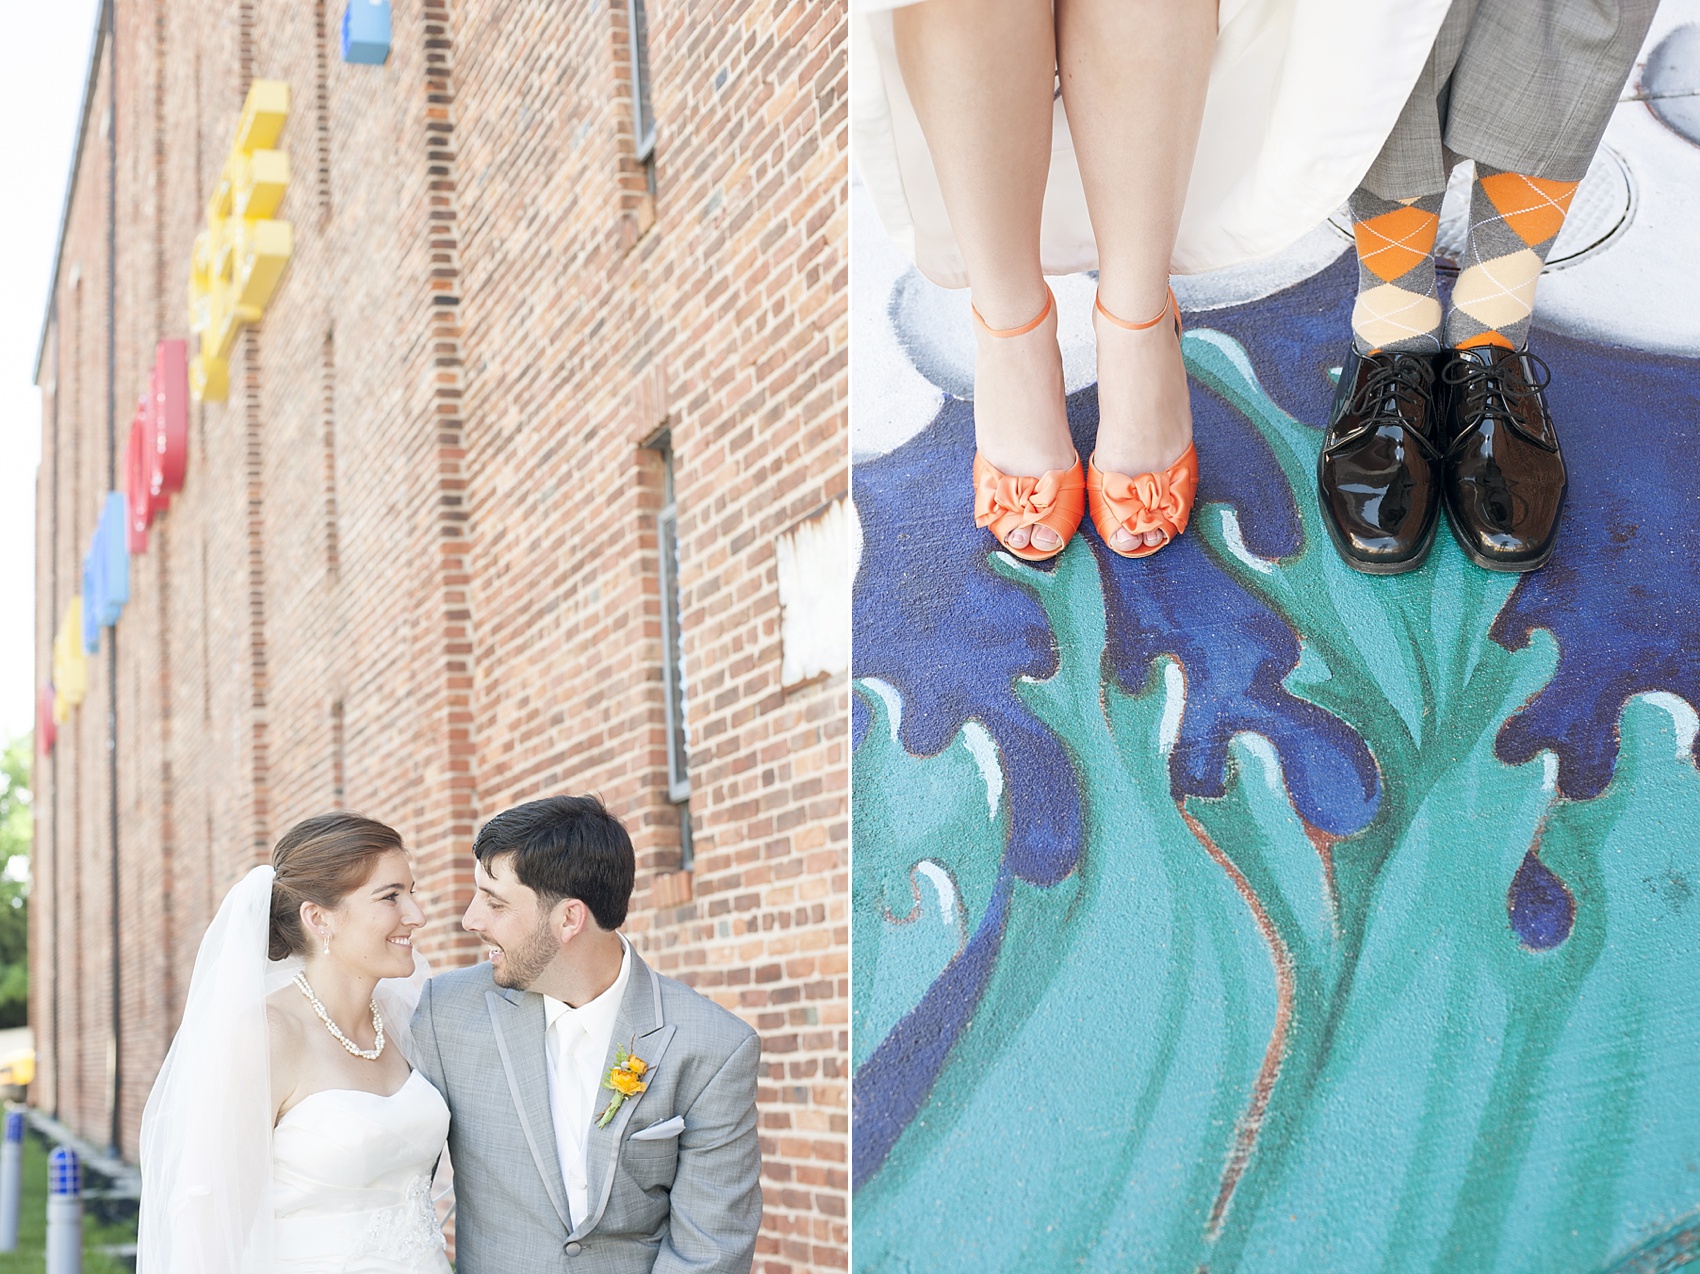 Bride and groom photos at Baltimore, Maryland American Visionary Art Museum. Photos by Mikkel Paige Photography.